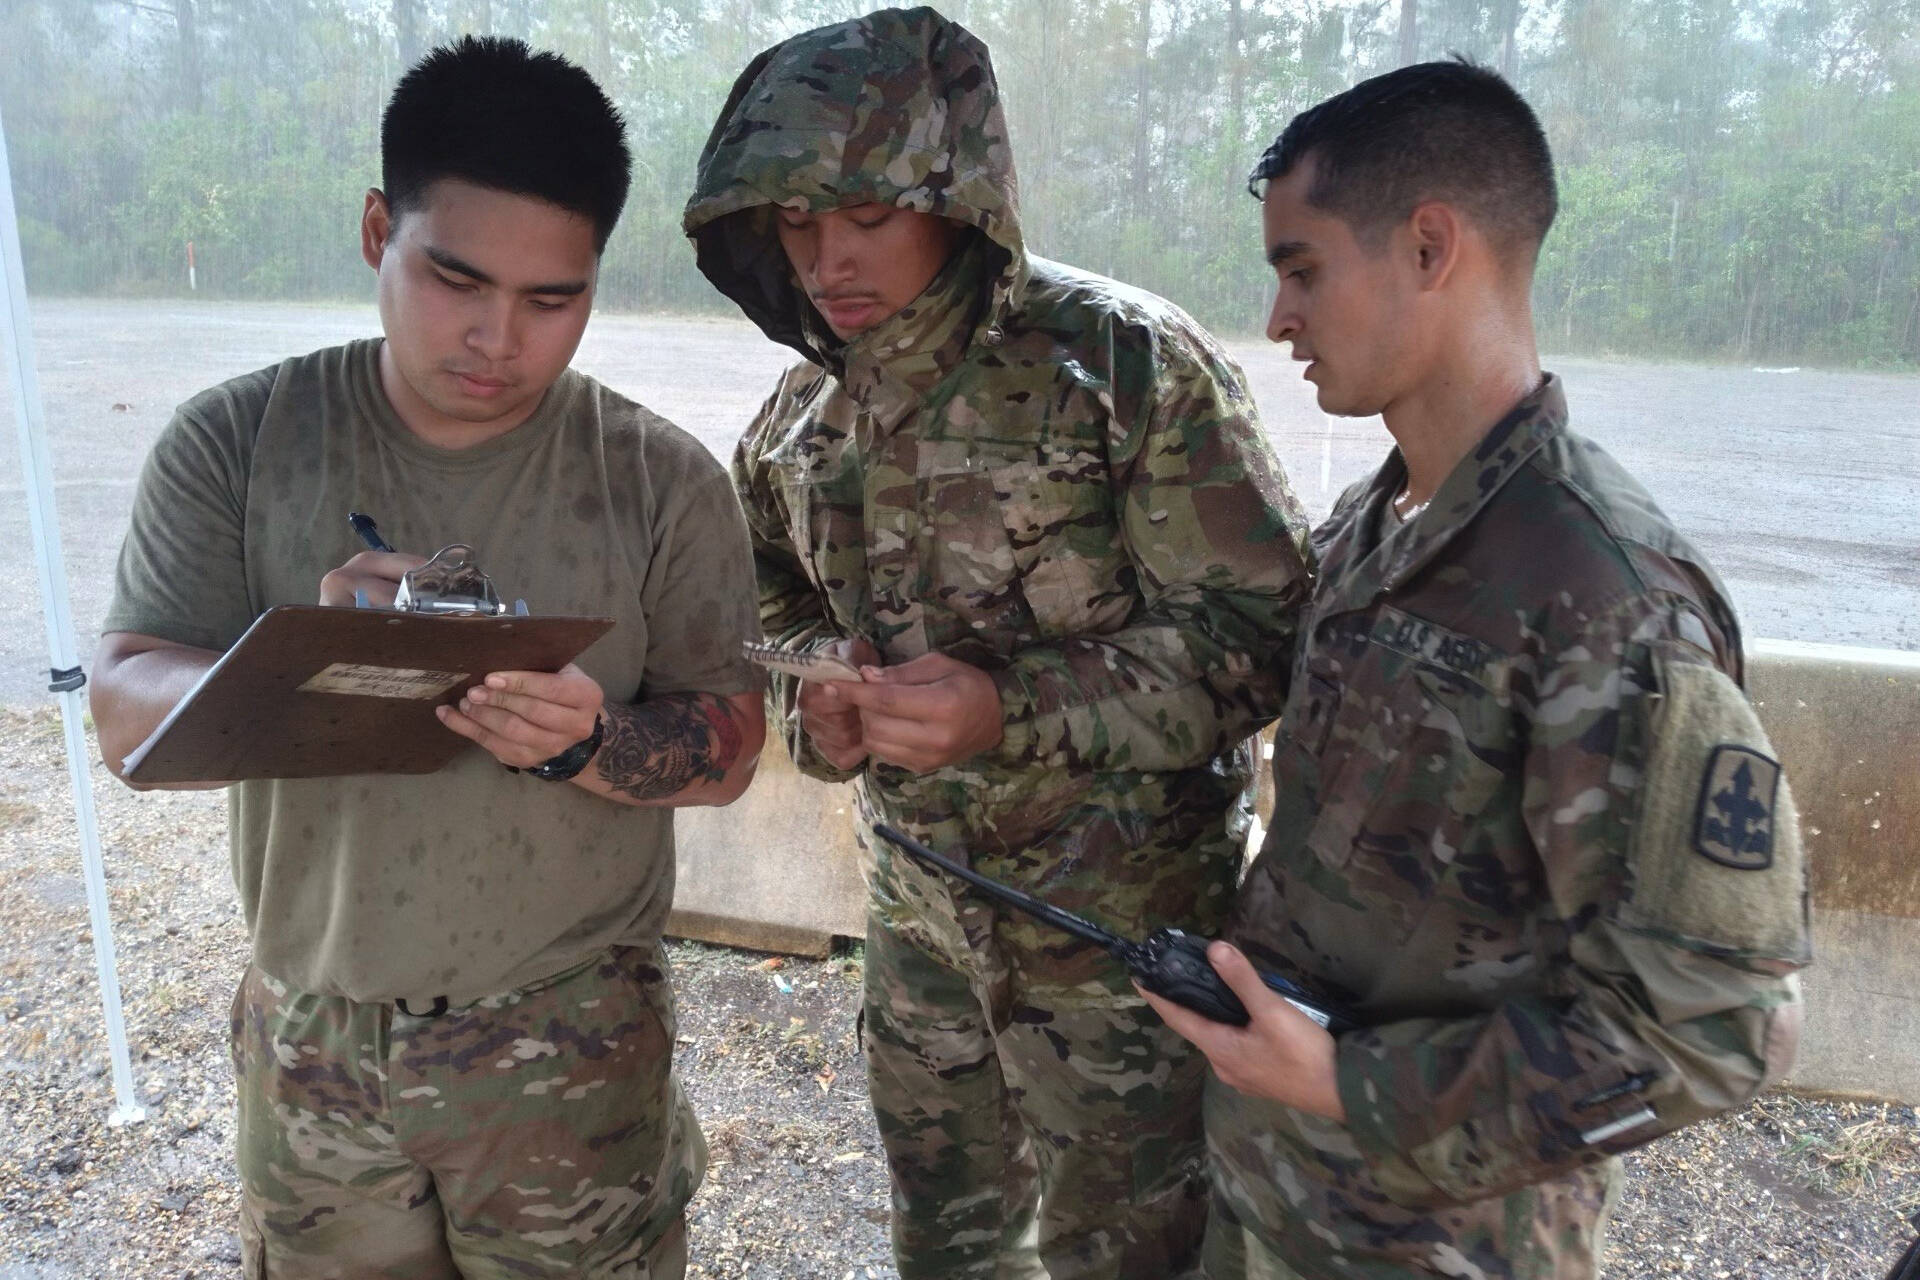 Sgt. Joemicheal Cristobal, Spc. Osias Passi, and Spc. Brennon Westfall, members of the Alaska Army National Guard and Task Force-Alaska, log trailer and driver information on a yard dog sheet, at a transportation yard in Roseland, Louisiana, Sept. 7, 2021. (U.S. Army National Guard / Staff Sgt. Jacob Tyrrell)